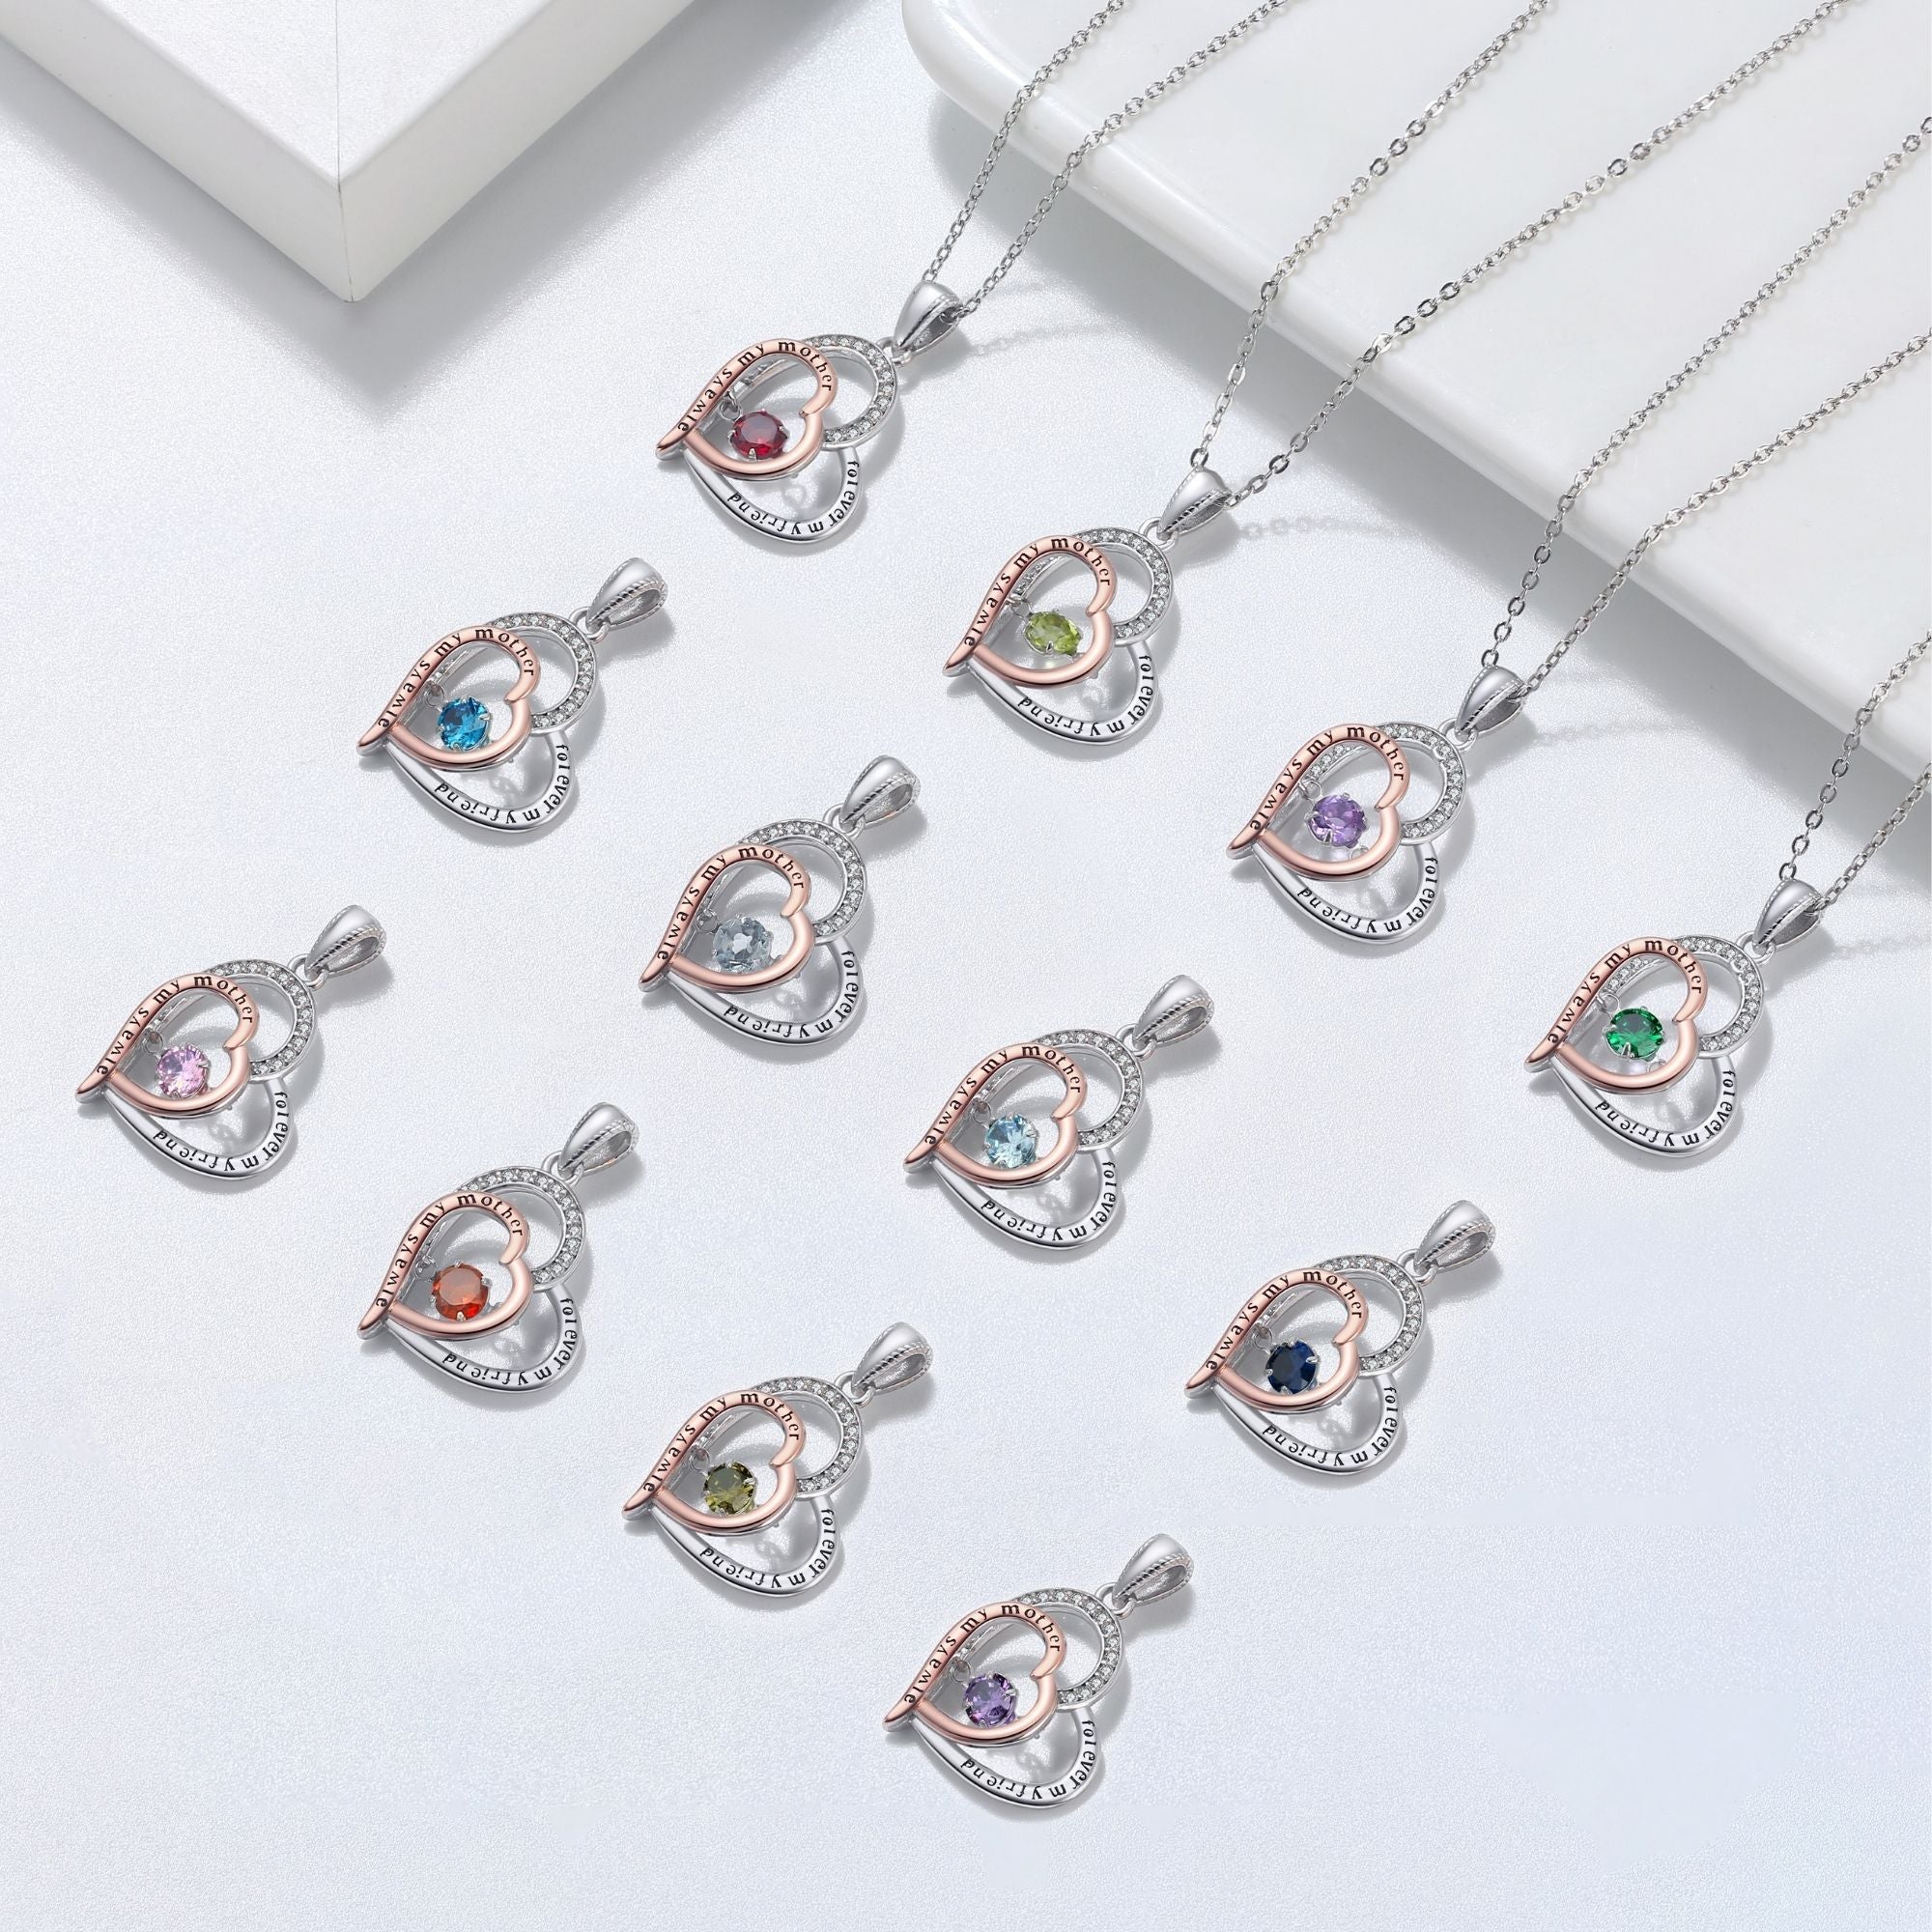 Birthstone Mom Necklace for Mother by Ginger Lyne Sterling Silver Swinging CZ